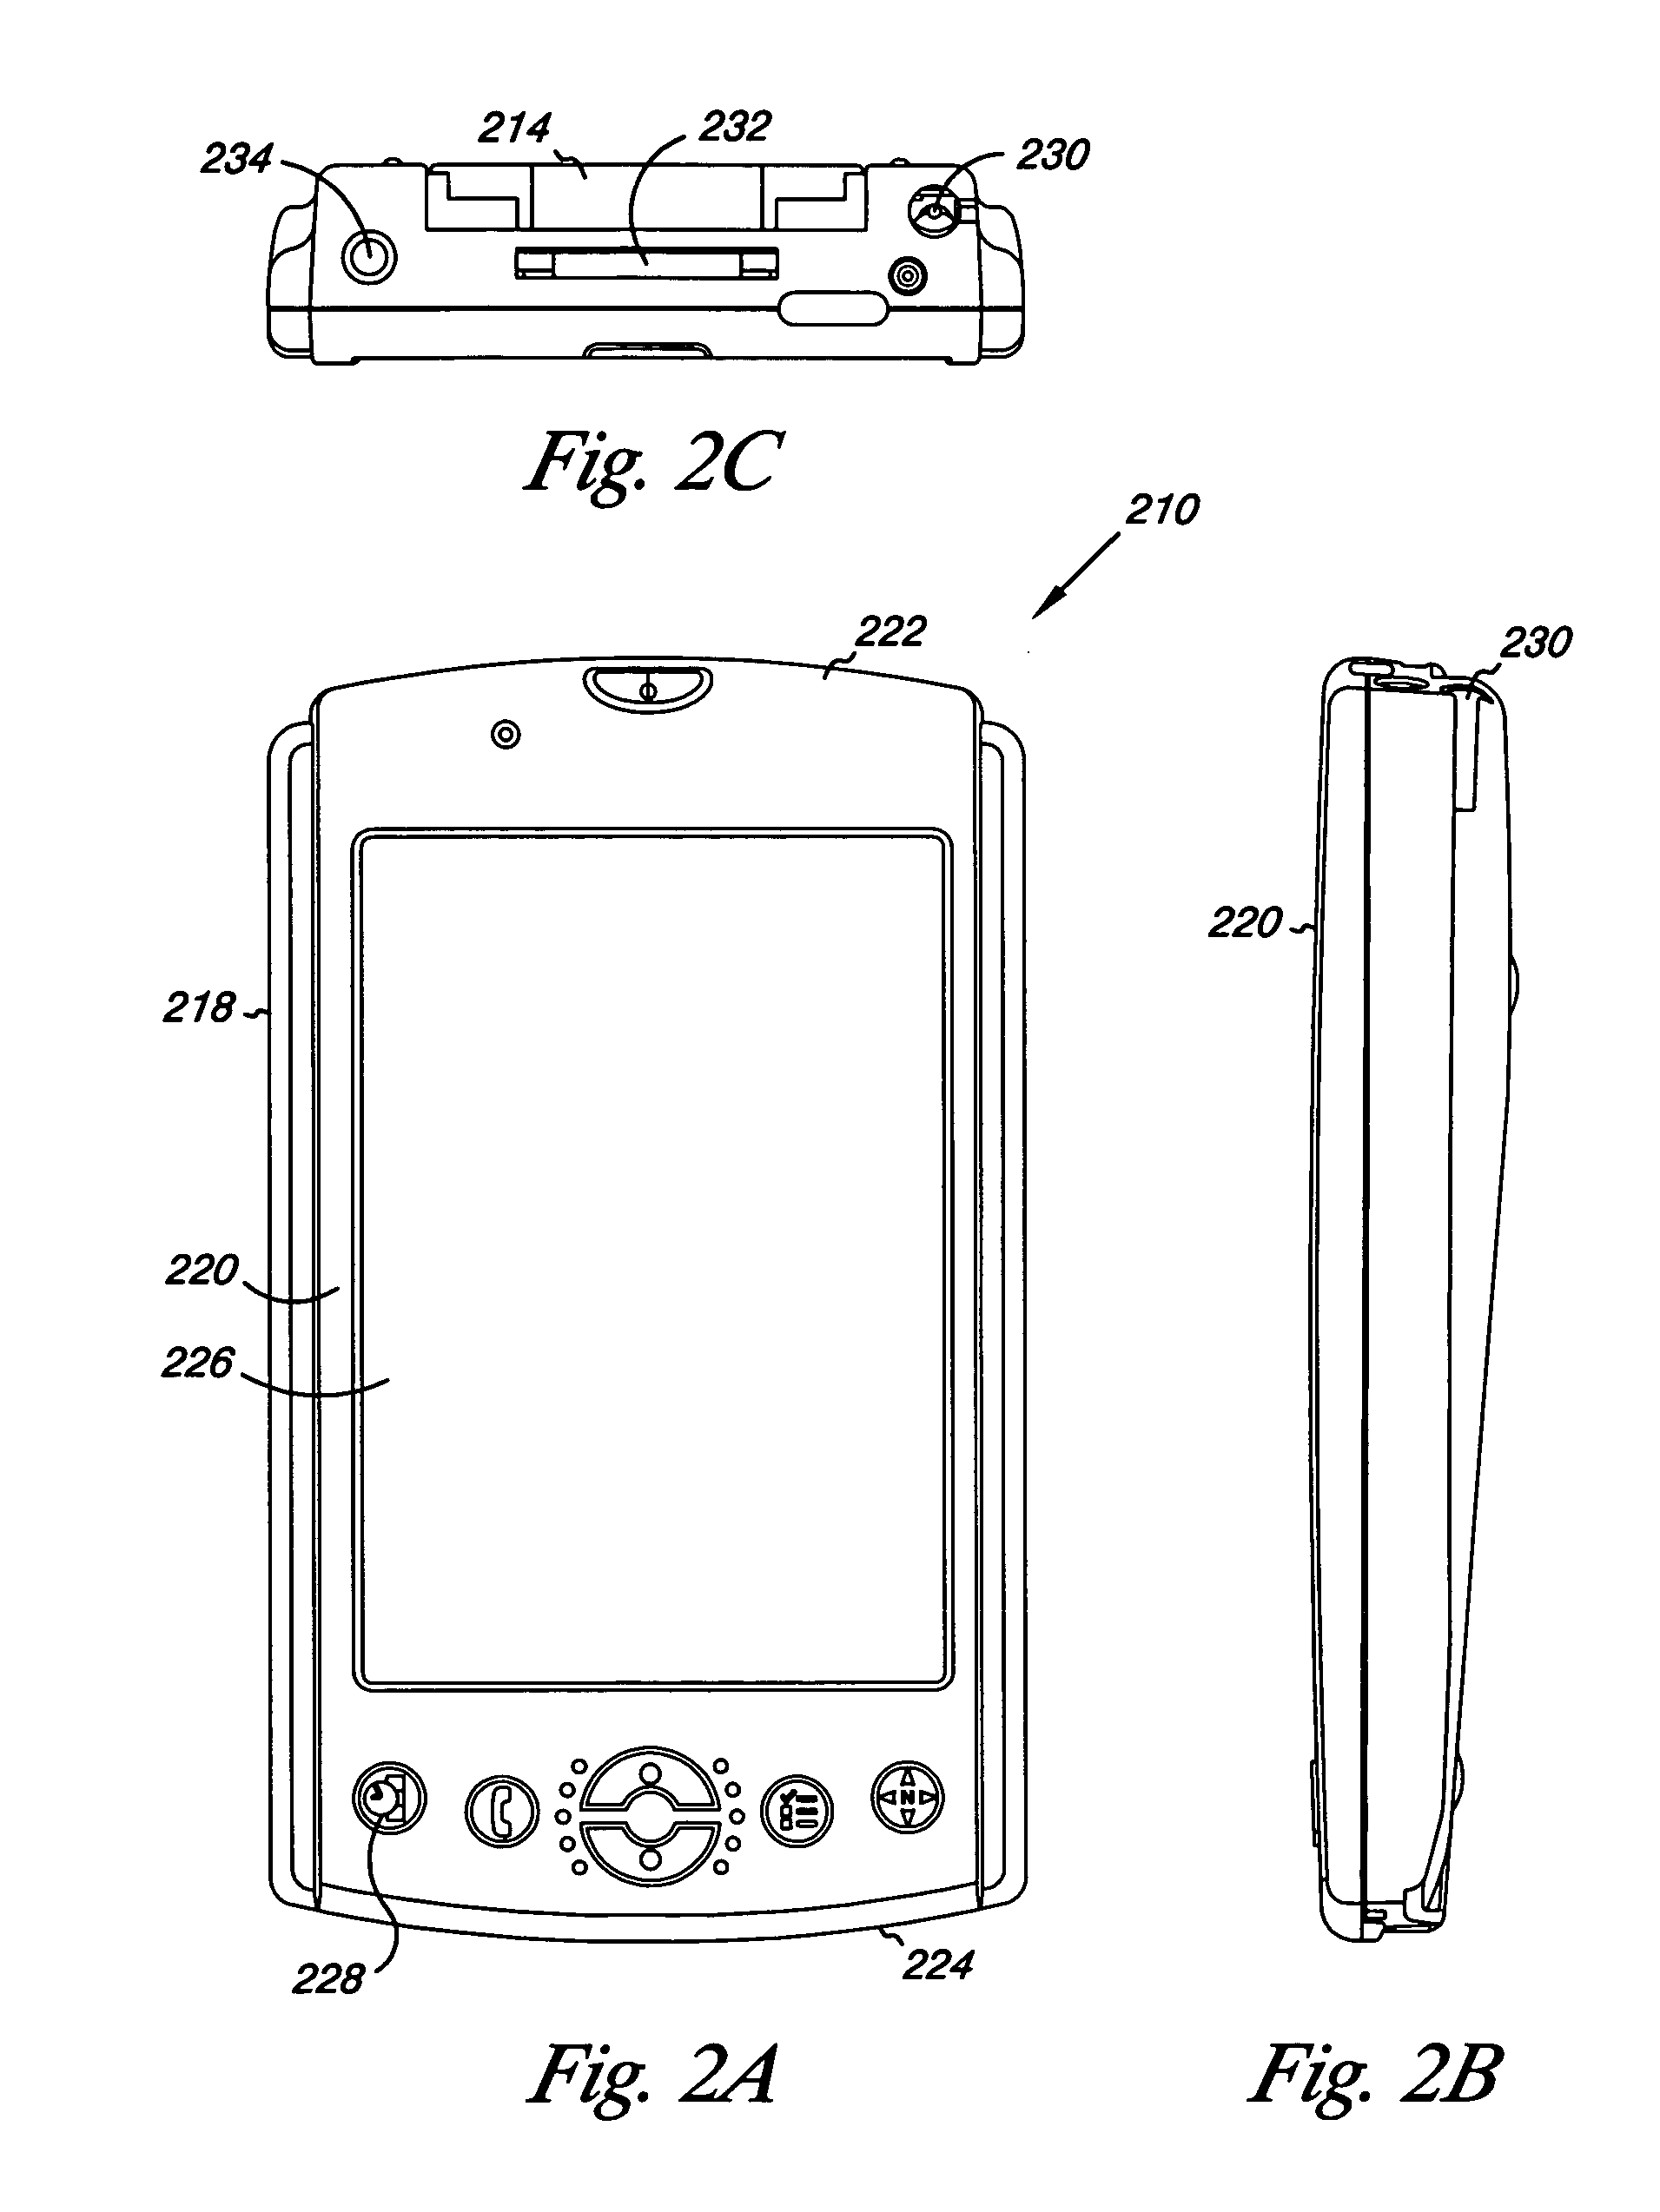 Portable navigation device with releasable antenna